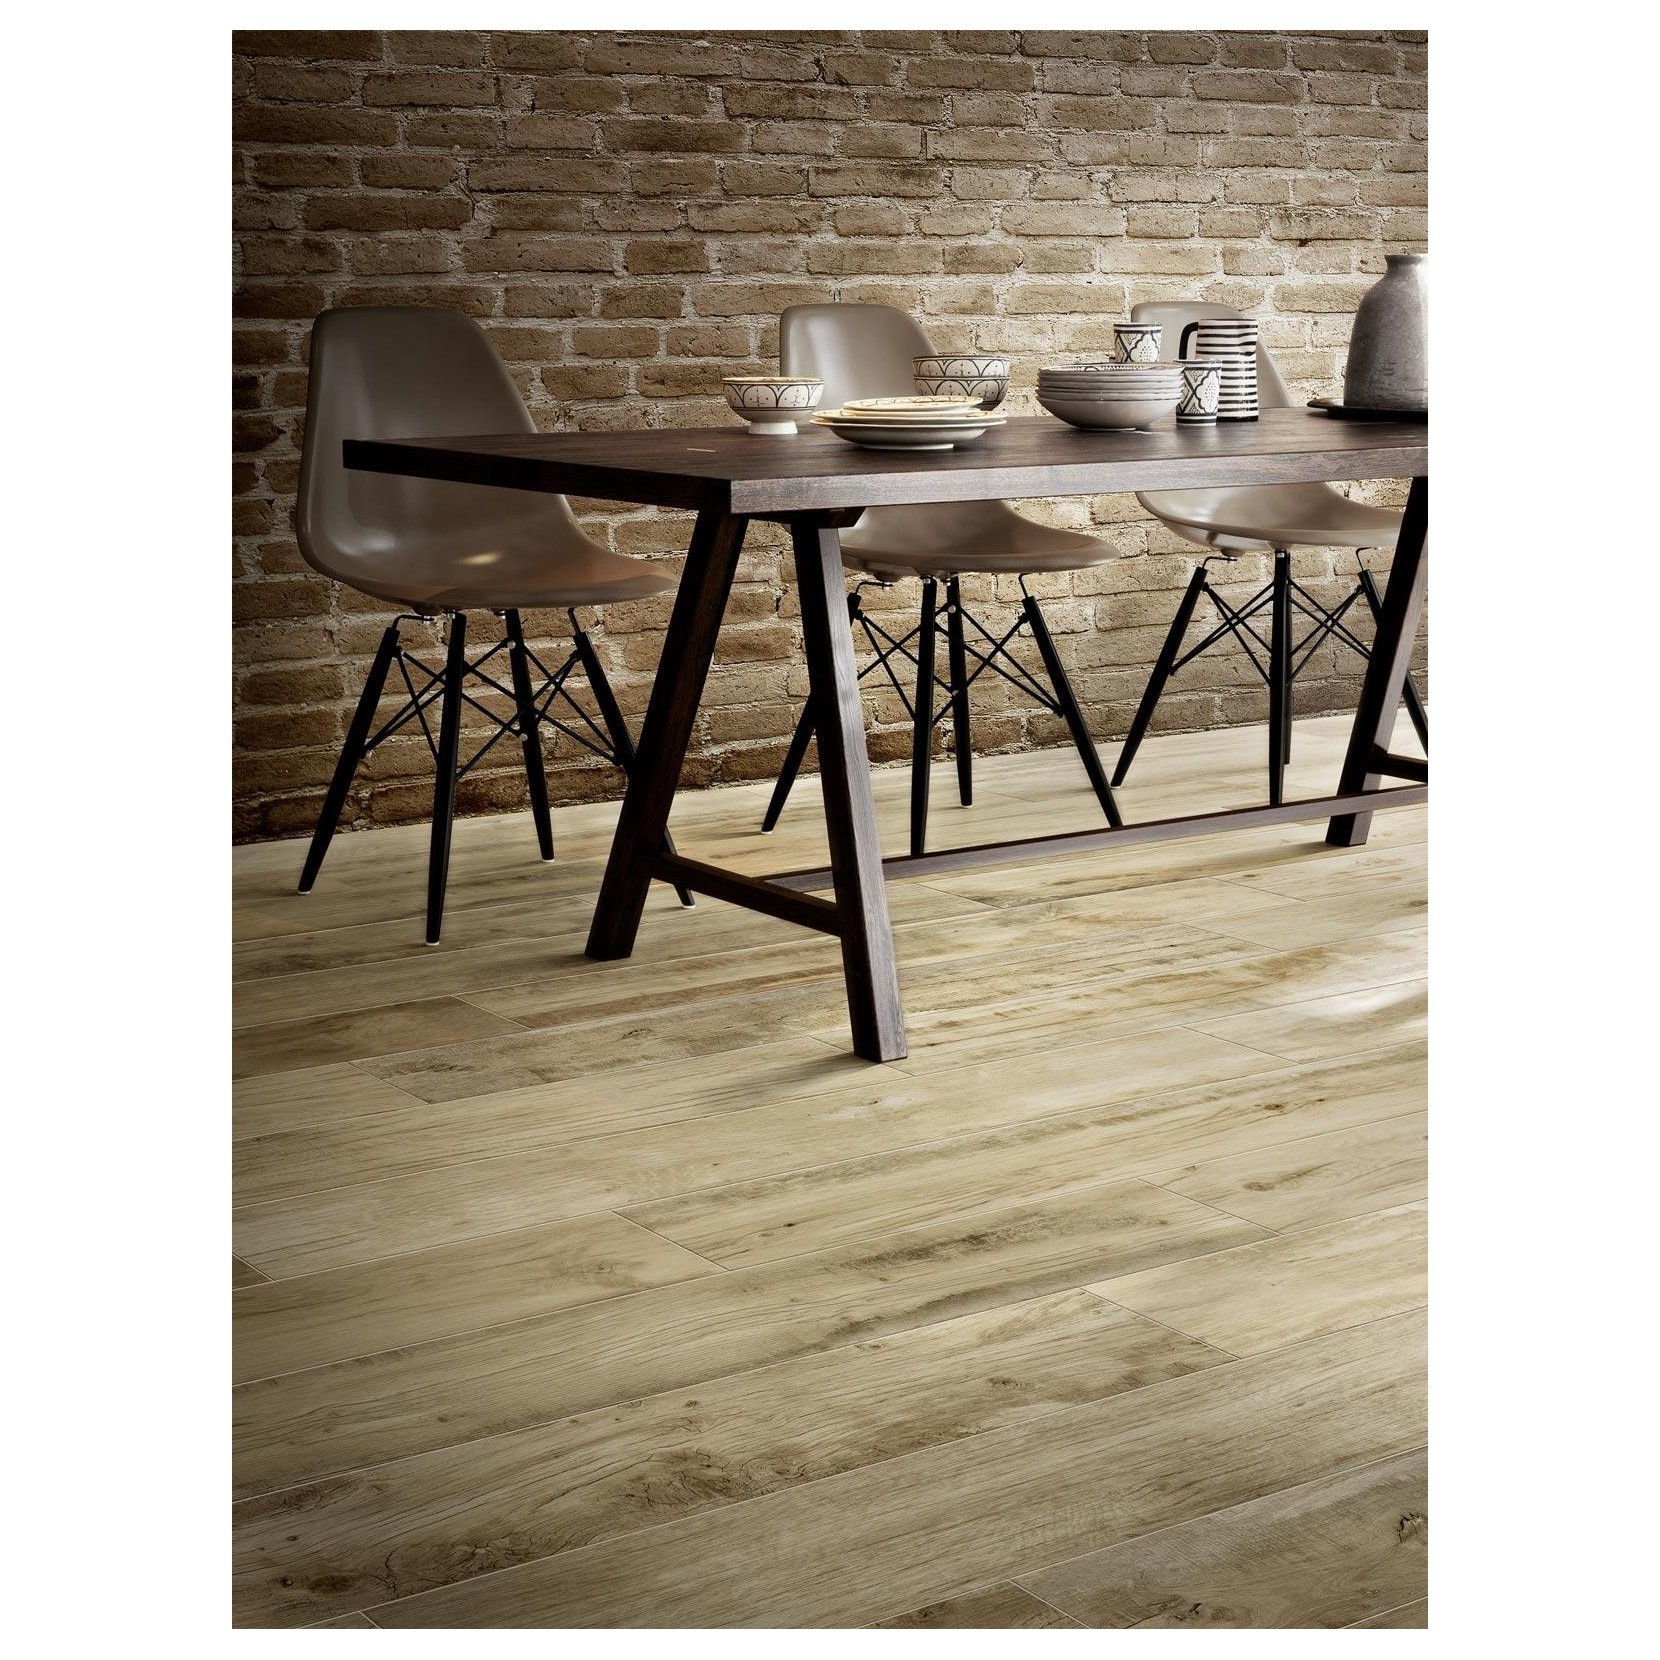 R14C Woodmania by Ragno. From €44 in Italy +delivery